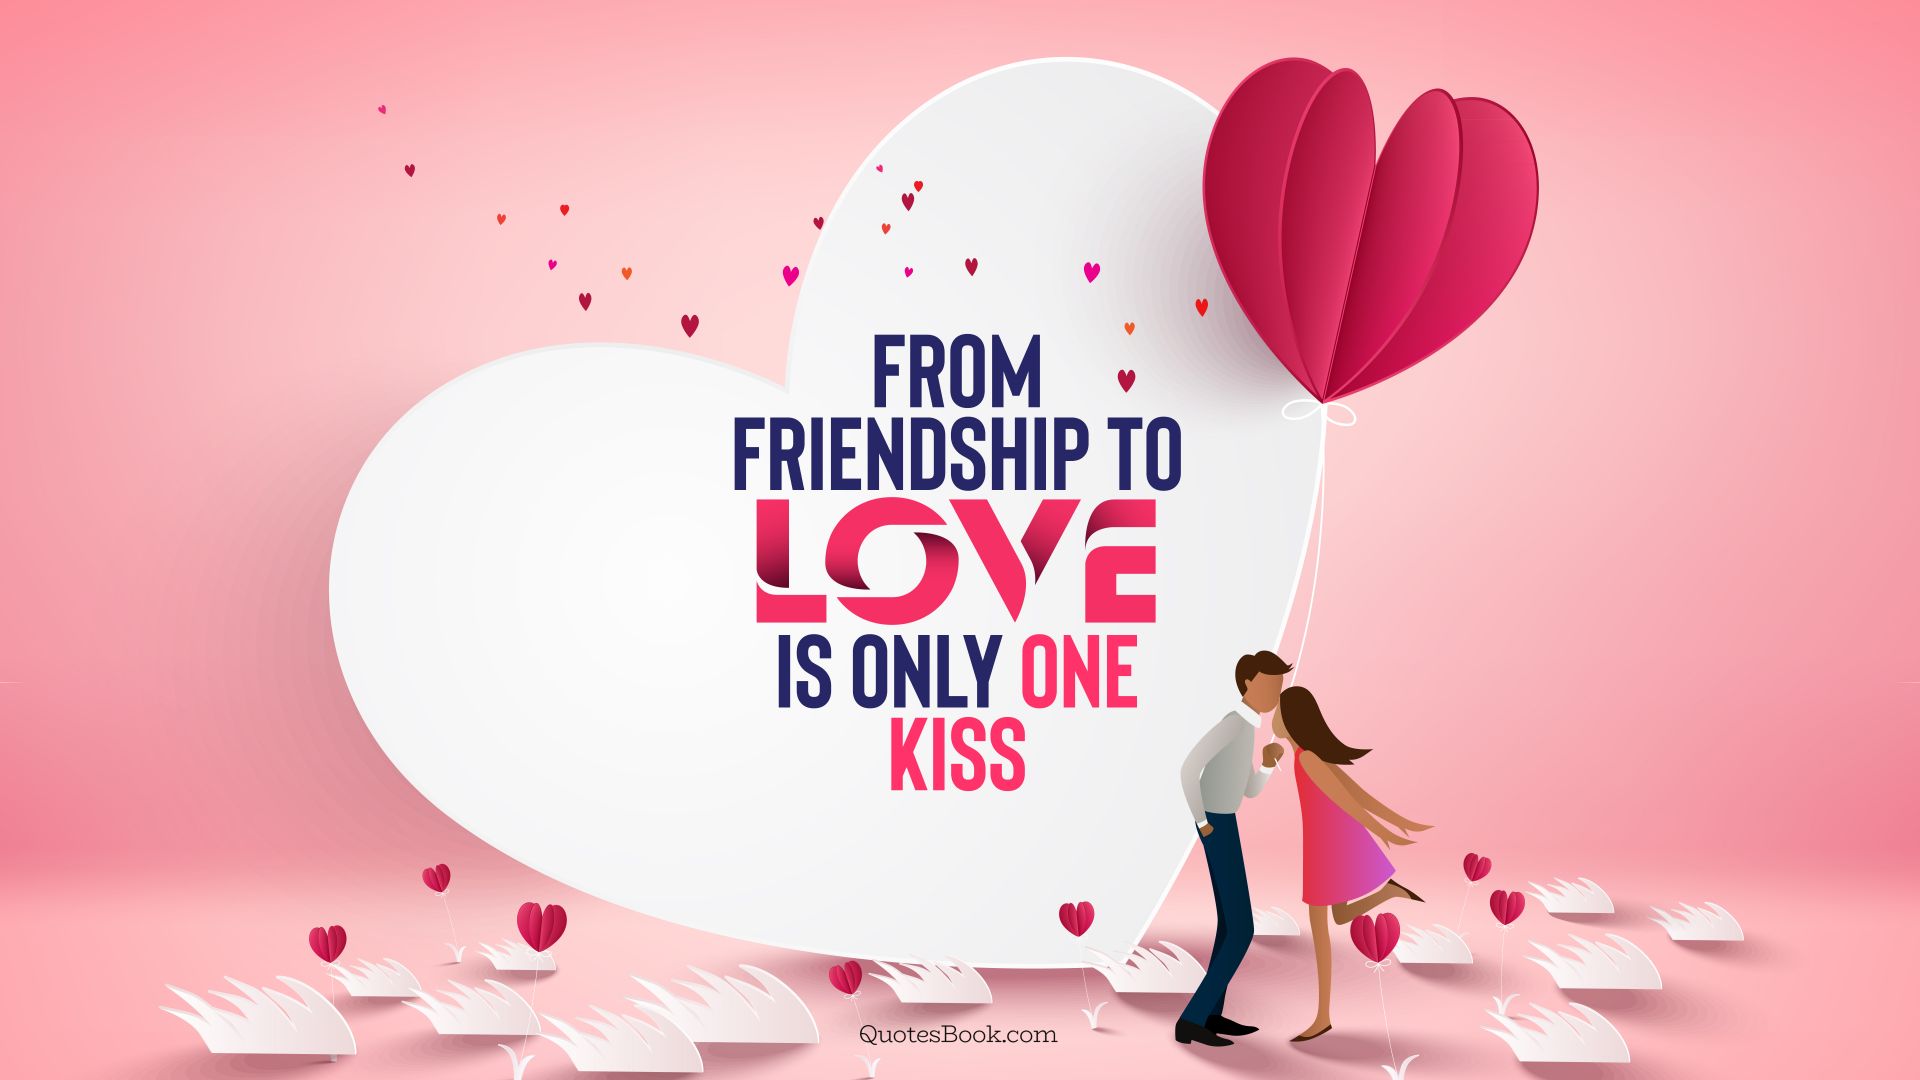 From friendship to love is only one kiss. - Quote by QuotesBook